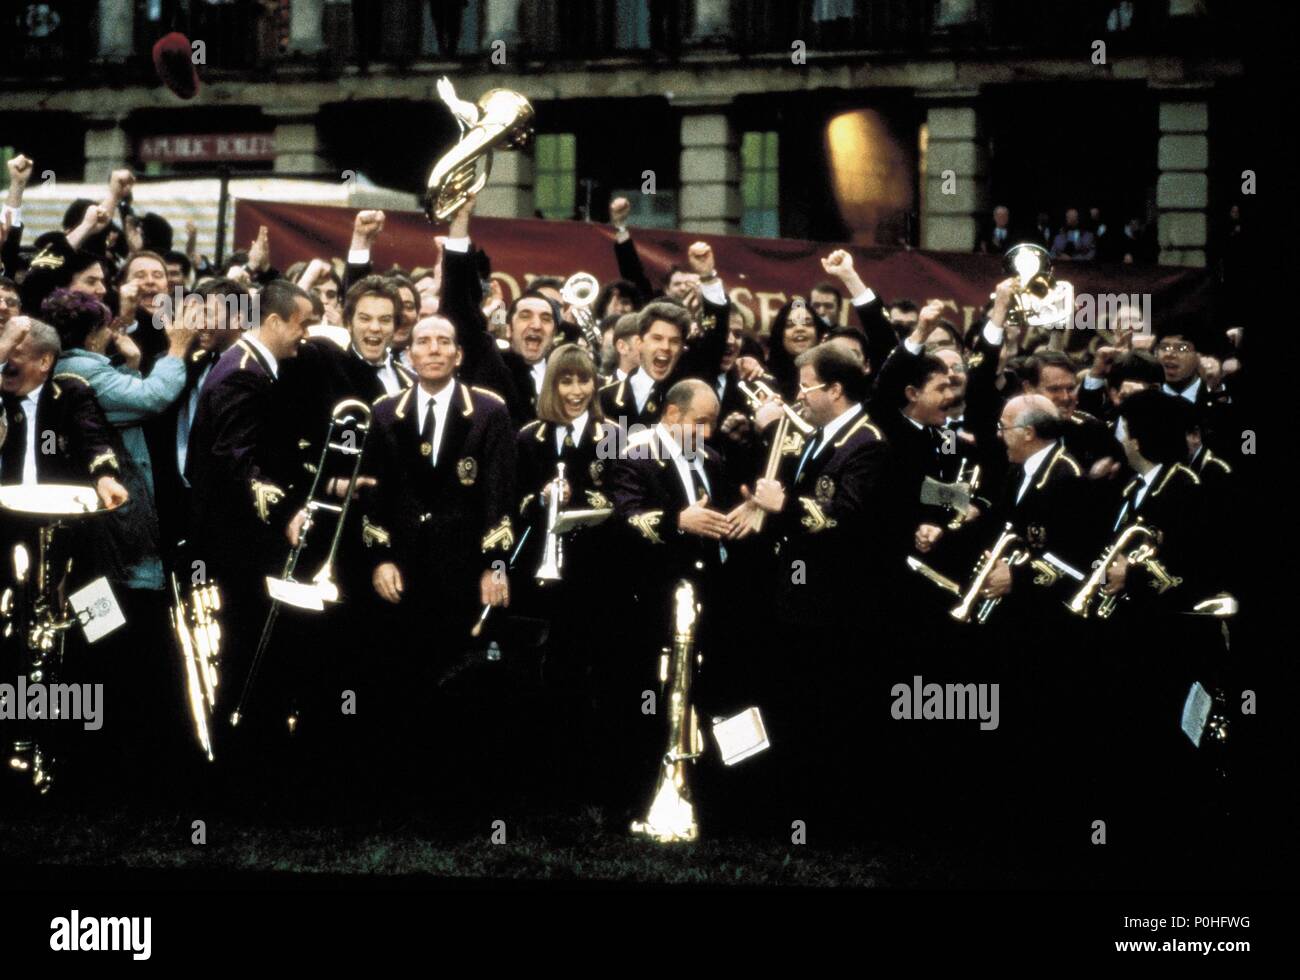 Original Film Title: BRASSED OFF.  English Title: BRASSED OFF.  Film Director: MARK HERMAN.  Year: 1996. Copyright: Editorial inside use only. This is a publicly distributed handout. Access rights only, no license of copyright provided. Mandatory authorization to Visual Icon (www.visual-icon.com) is required for the reproduction of this image. Credit: MIRAMAX / Album Stock Photo